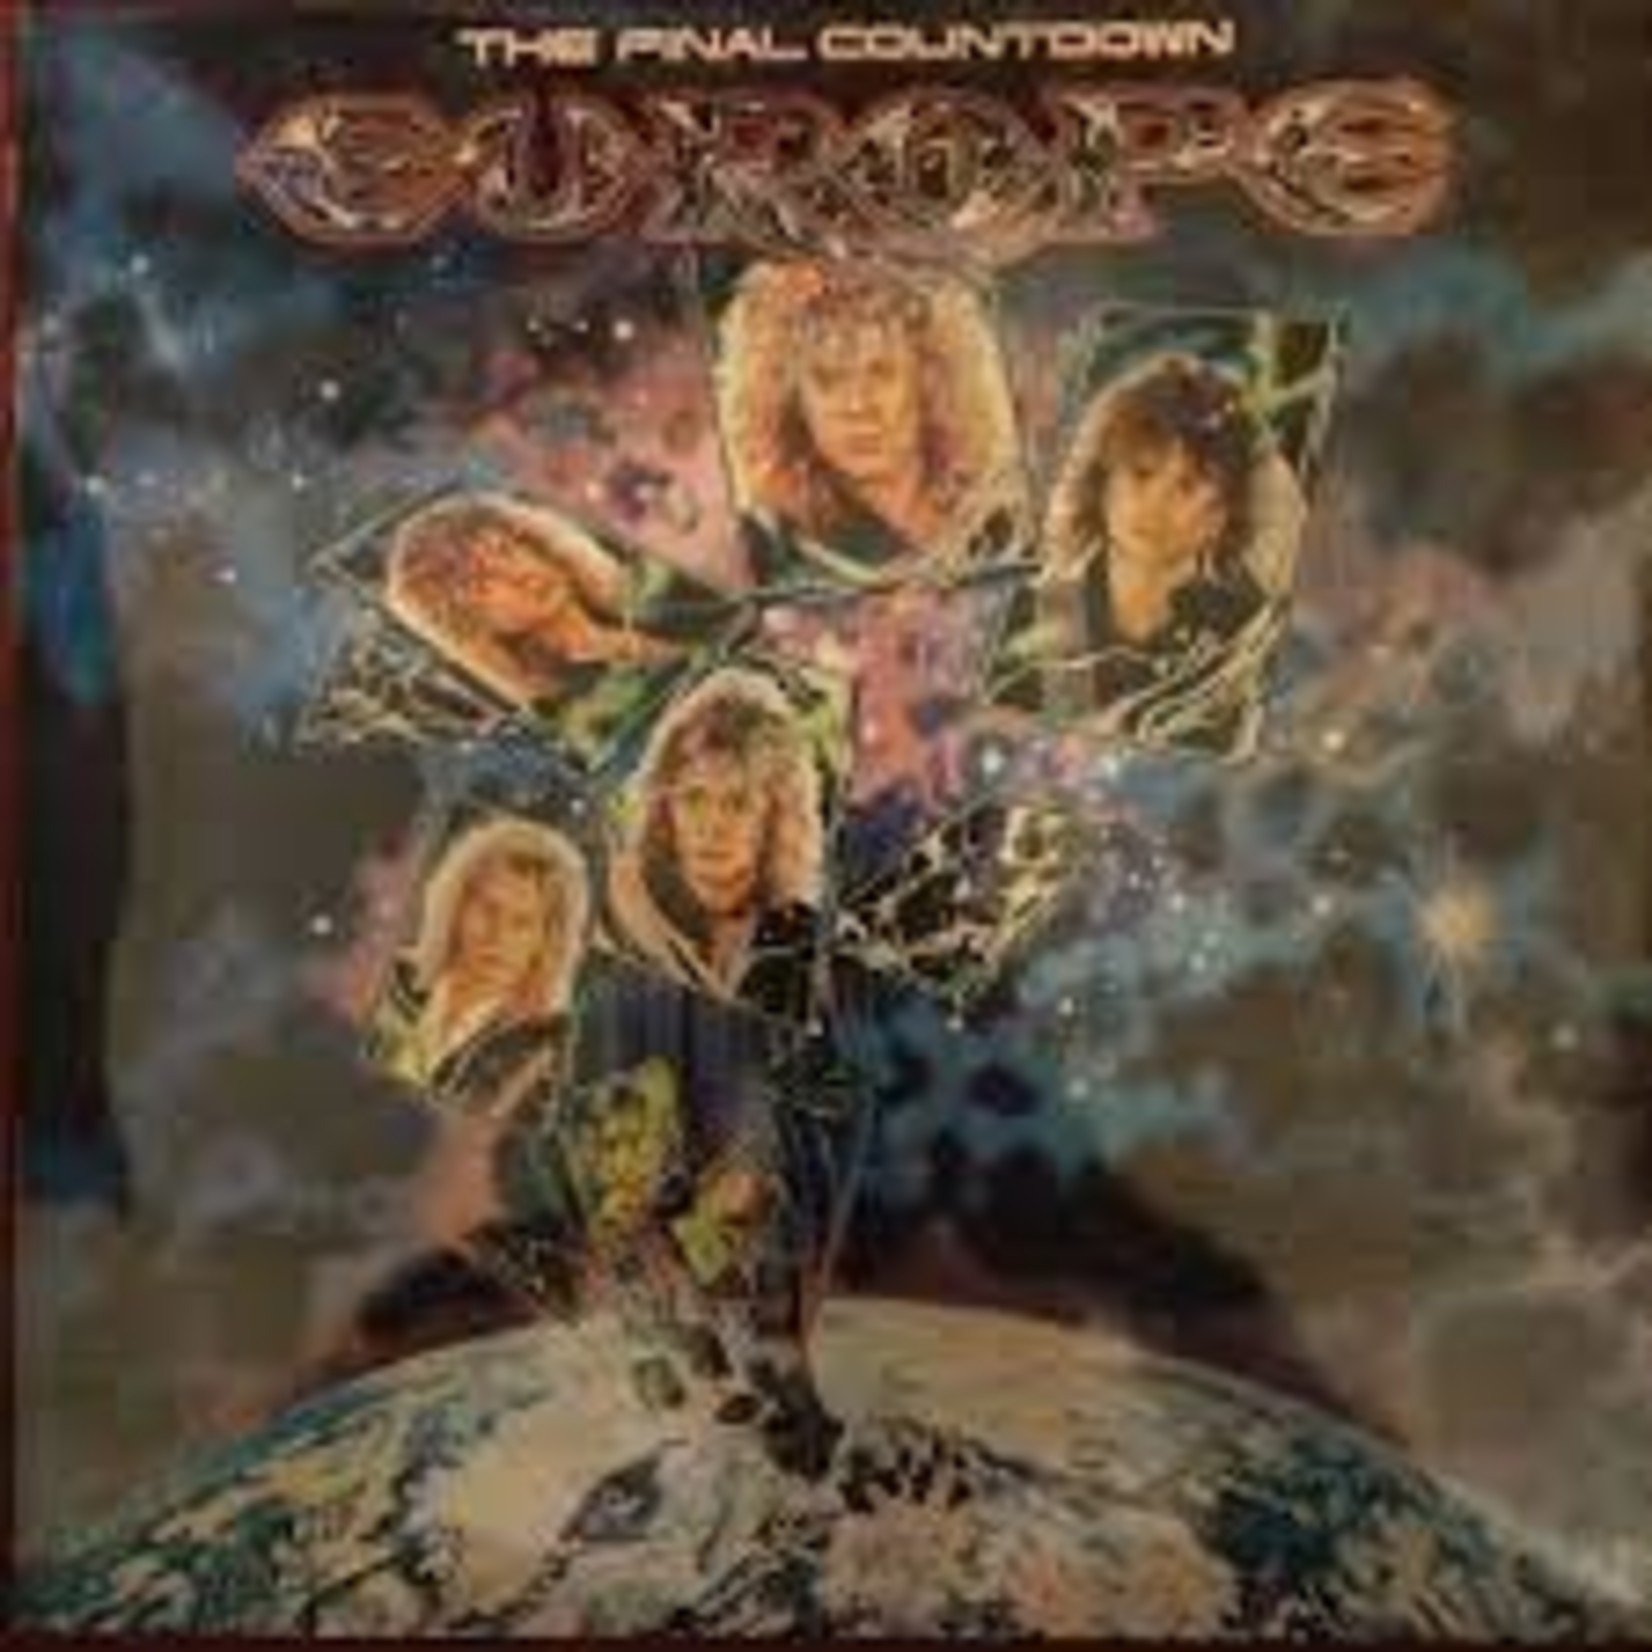 EUROPE - the final countdown LP (water damage sleeve)